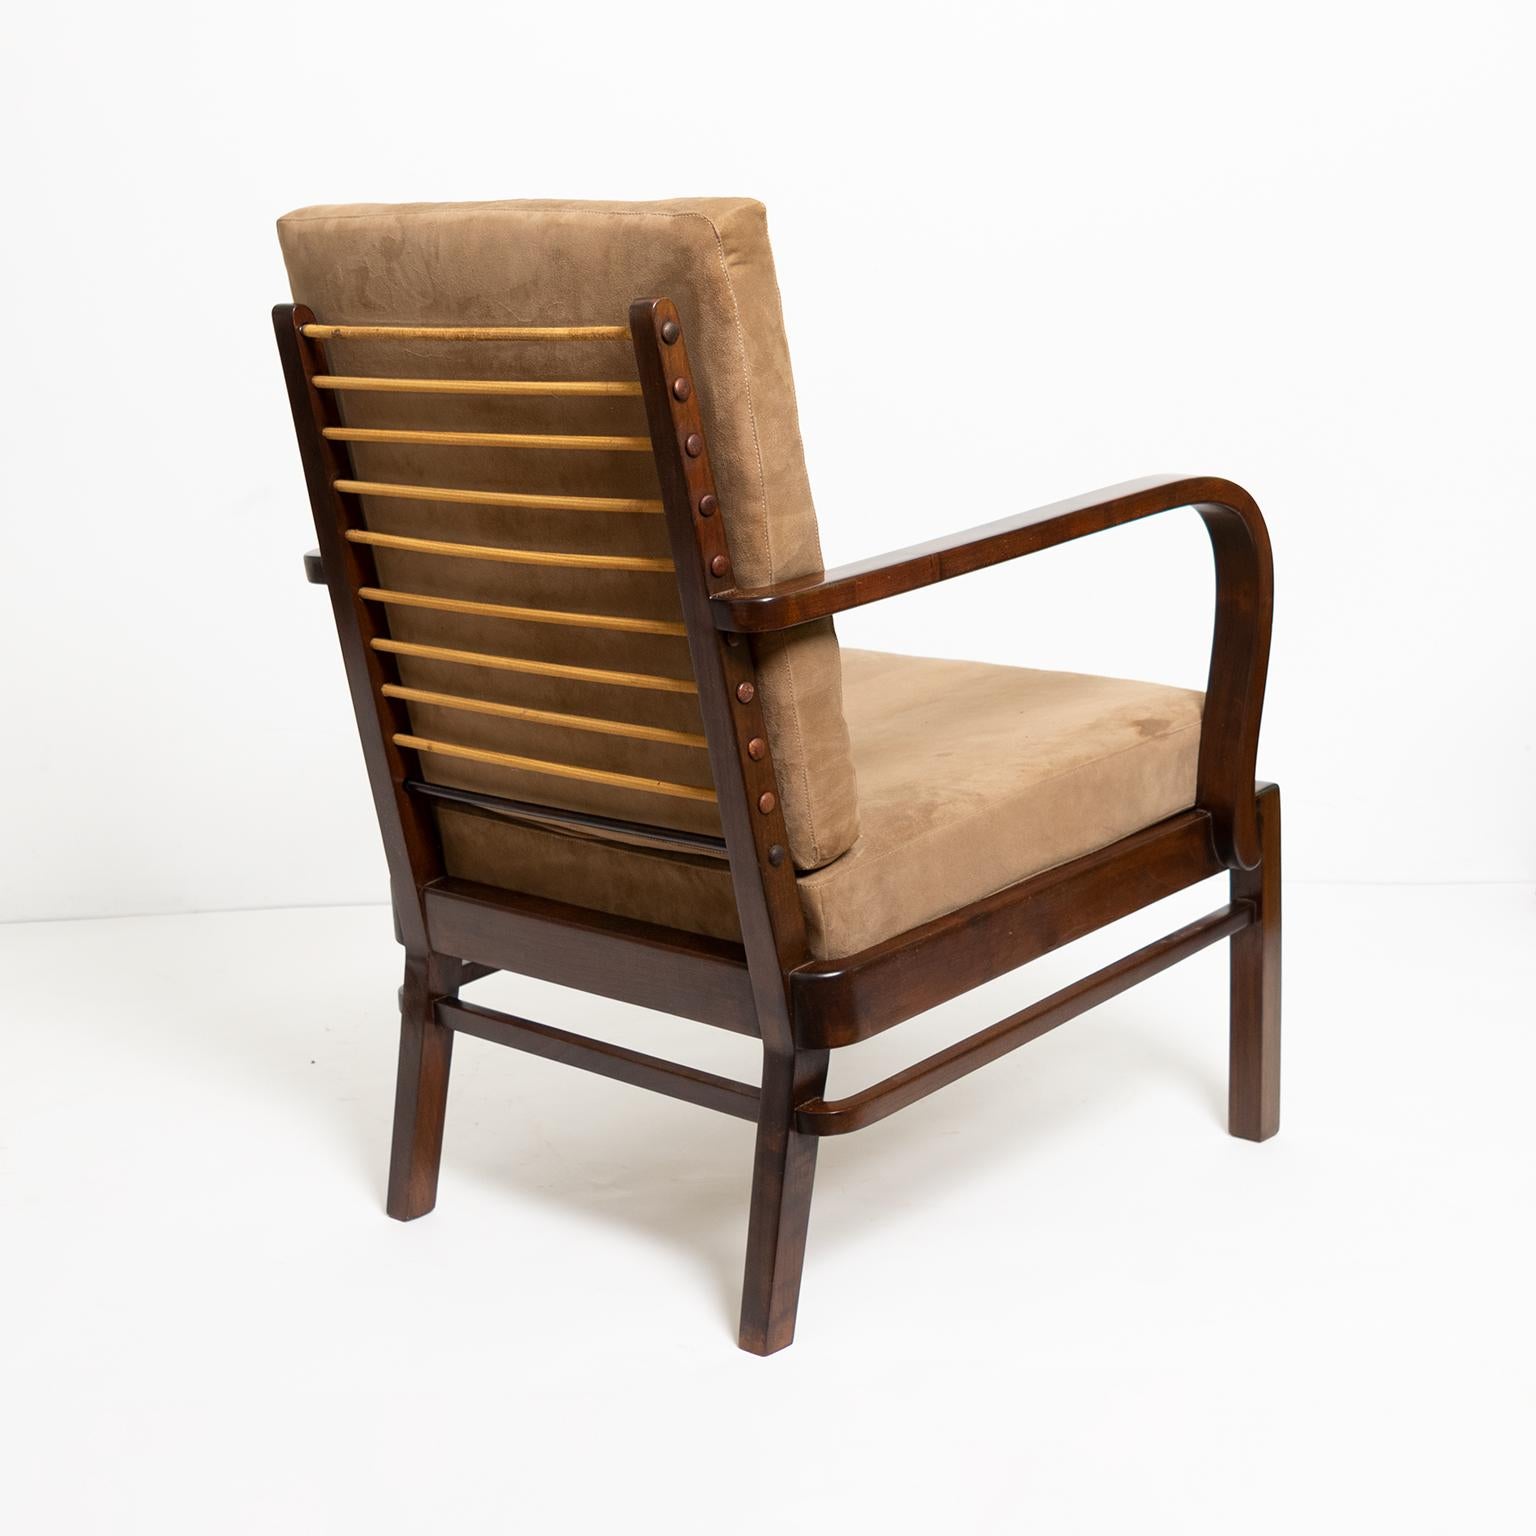 A modernist lounge chair designed by Wilhelm and Willy Knoll for Knoll Antimott, Germany 1920s. The light weight stained wood frame exemplified early 20th century modern furniture design. The back cushion is supported with “exposed” springs wrapped